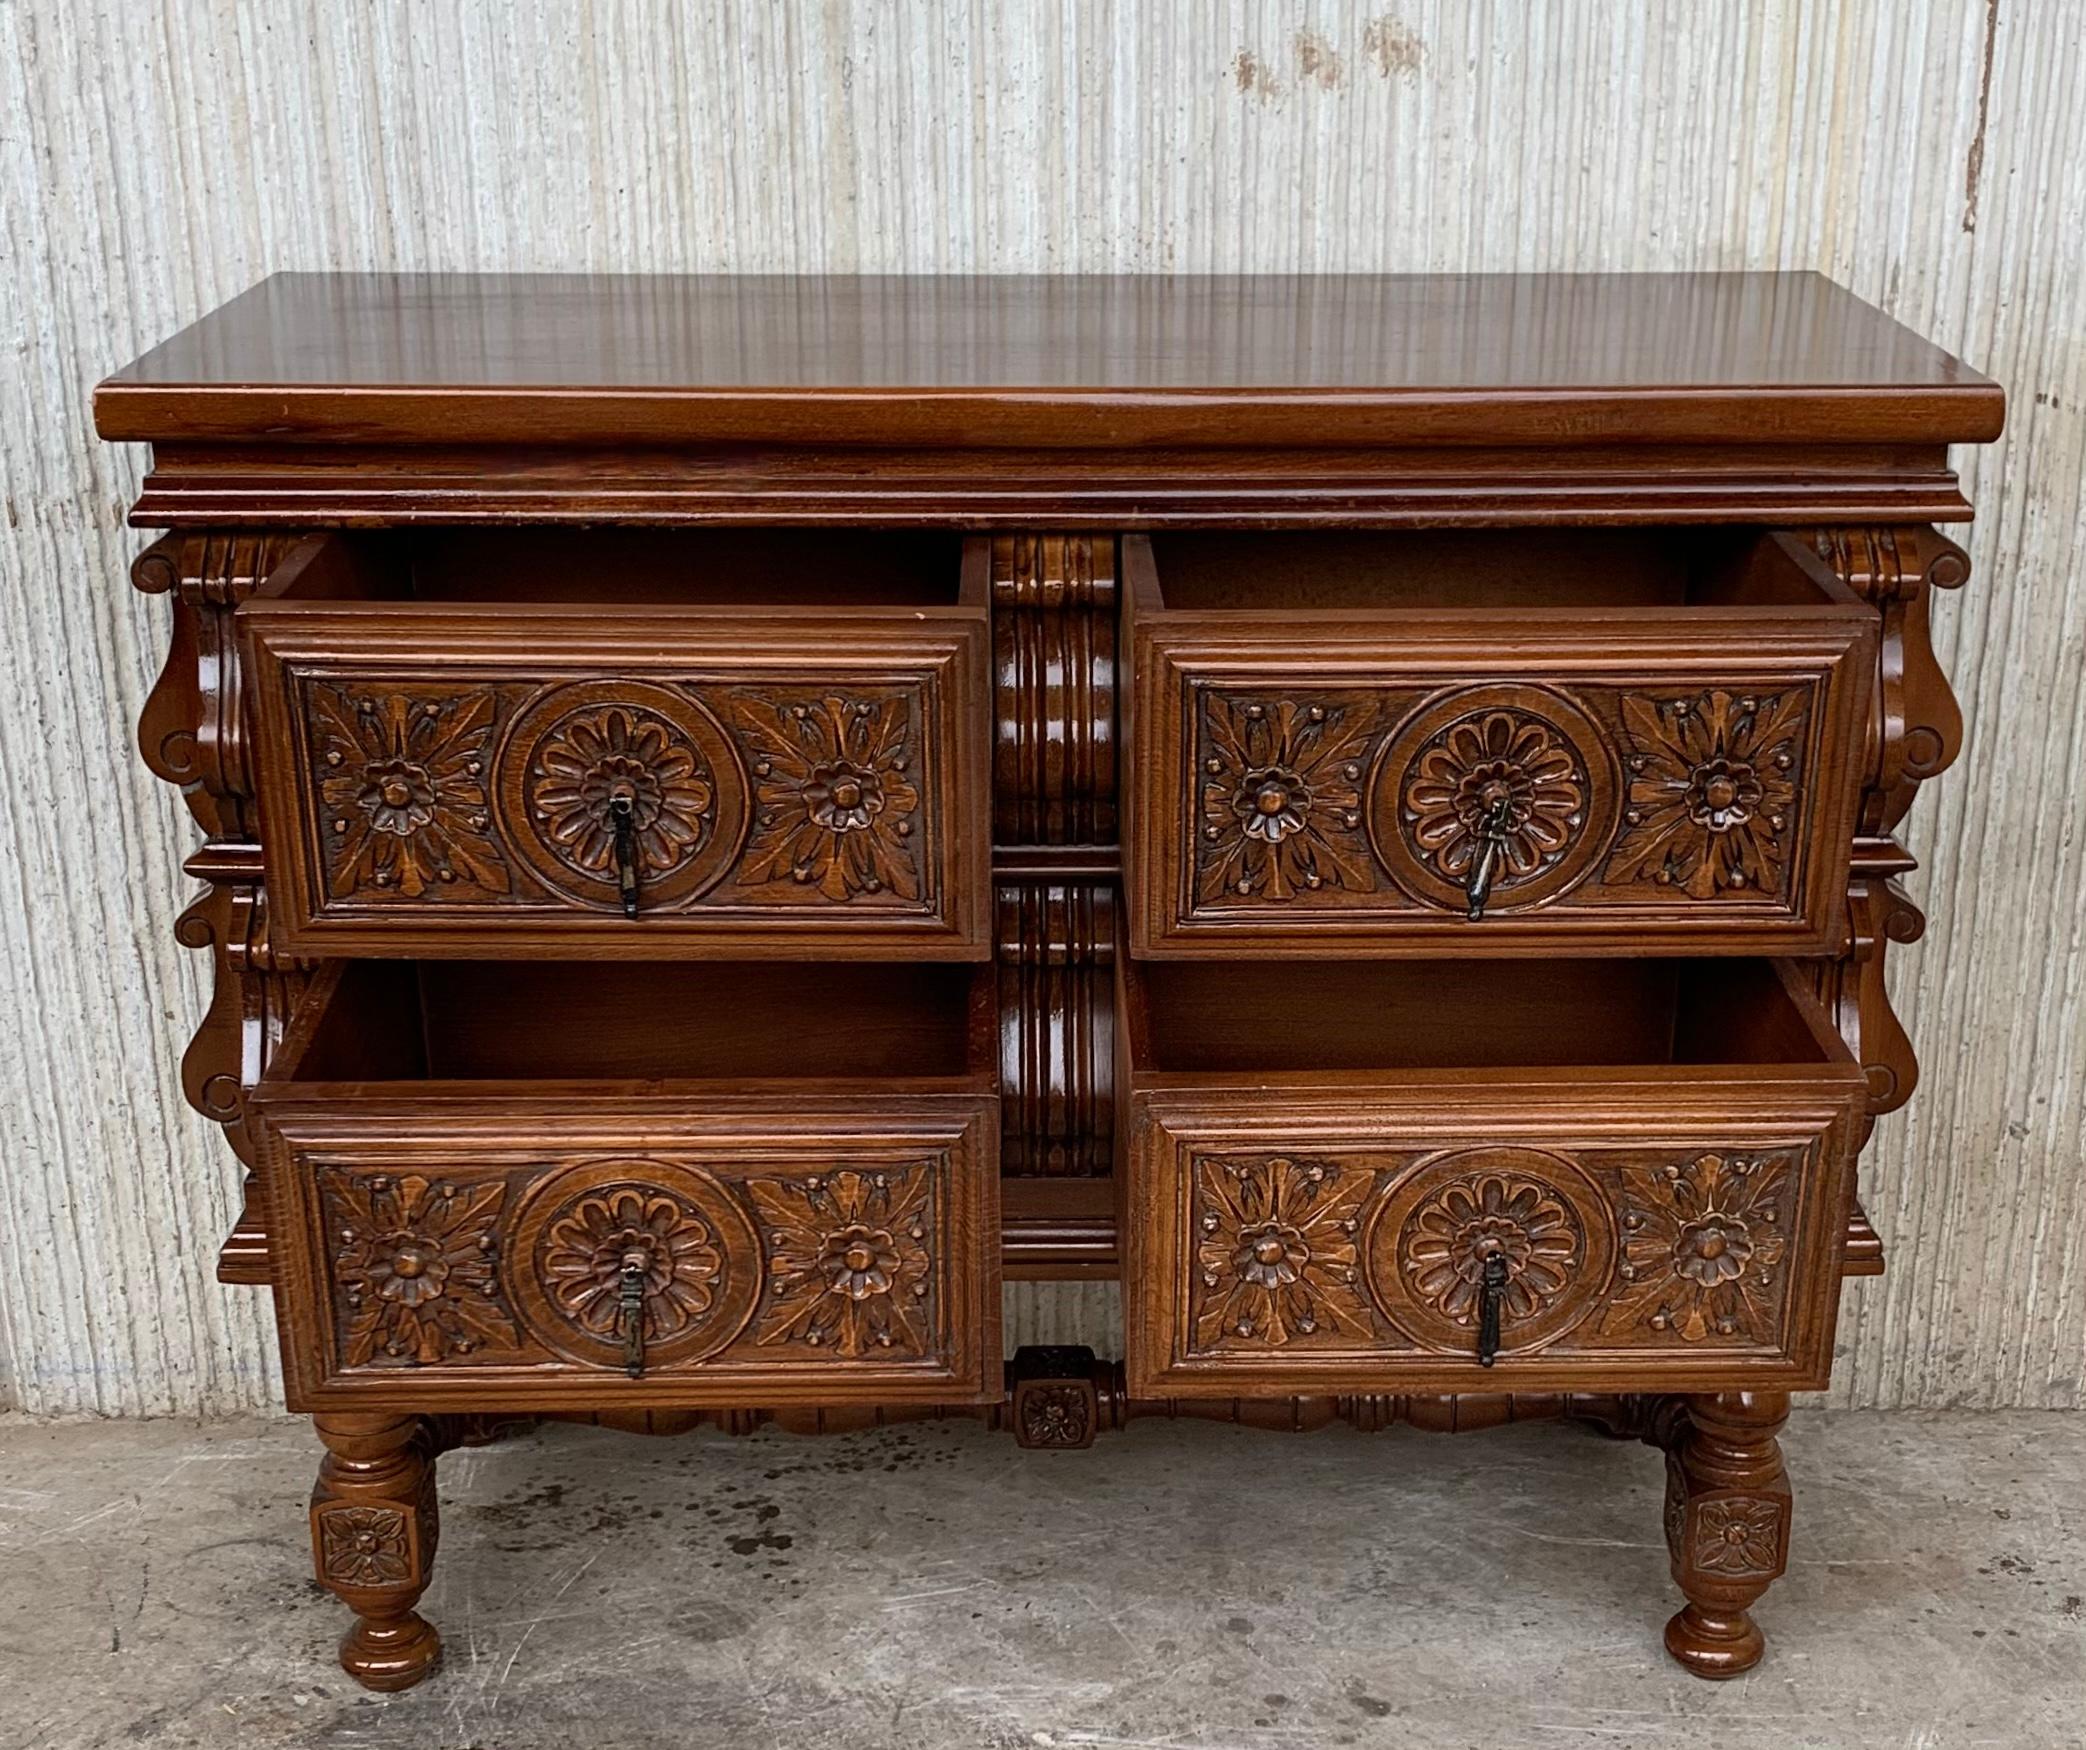 19th Century 20th Spanish Chest of Drawers with Original Hardware and carved drawers For Sale